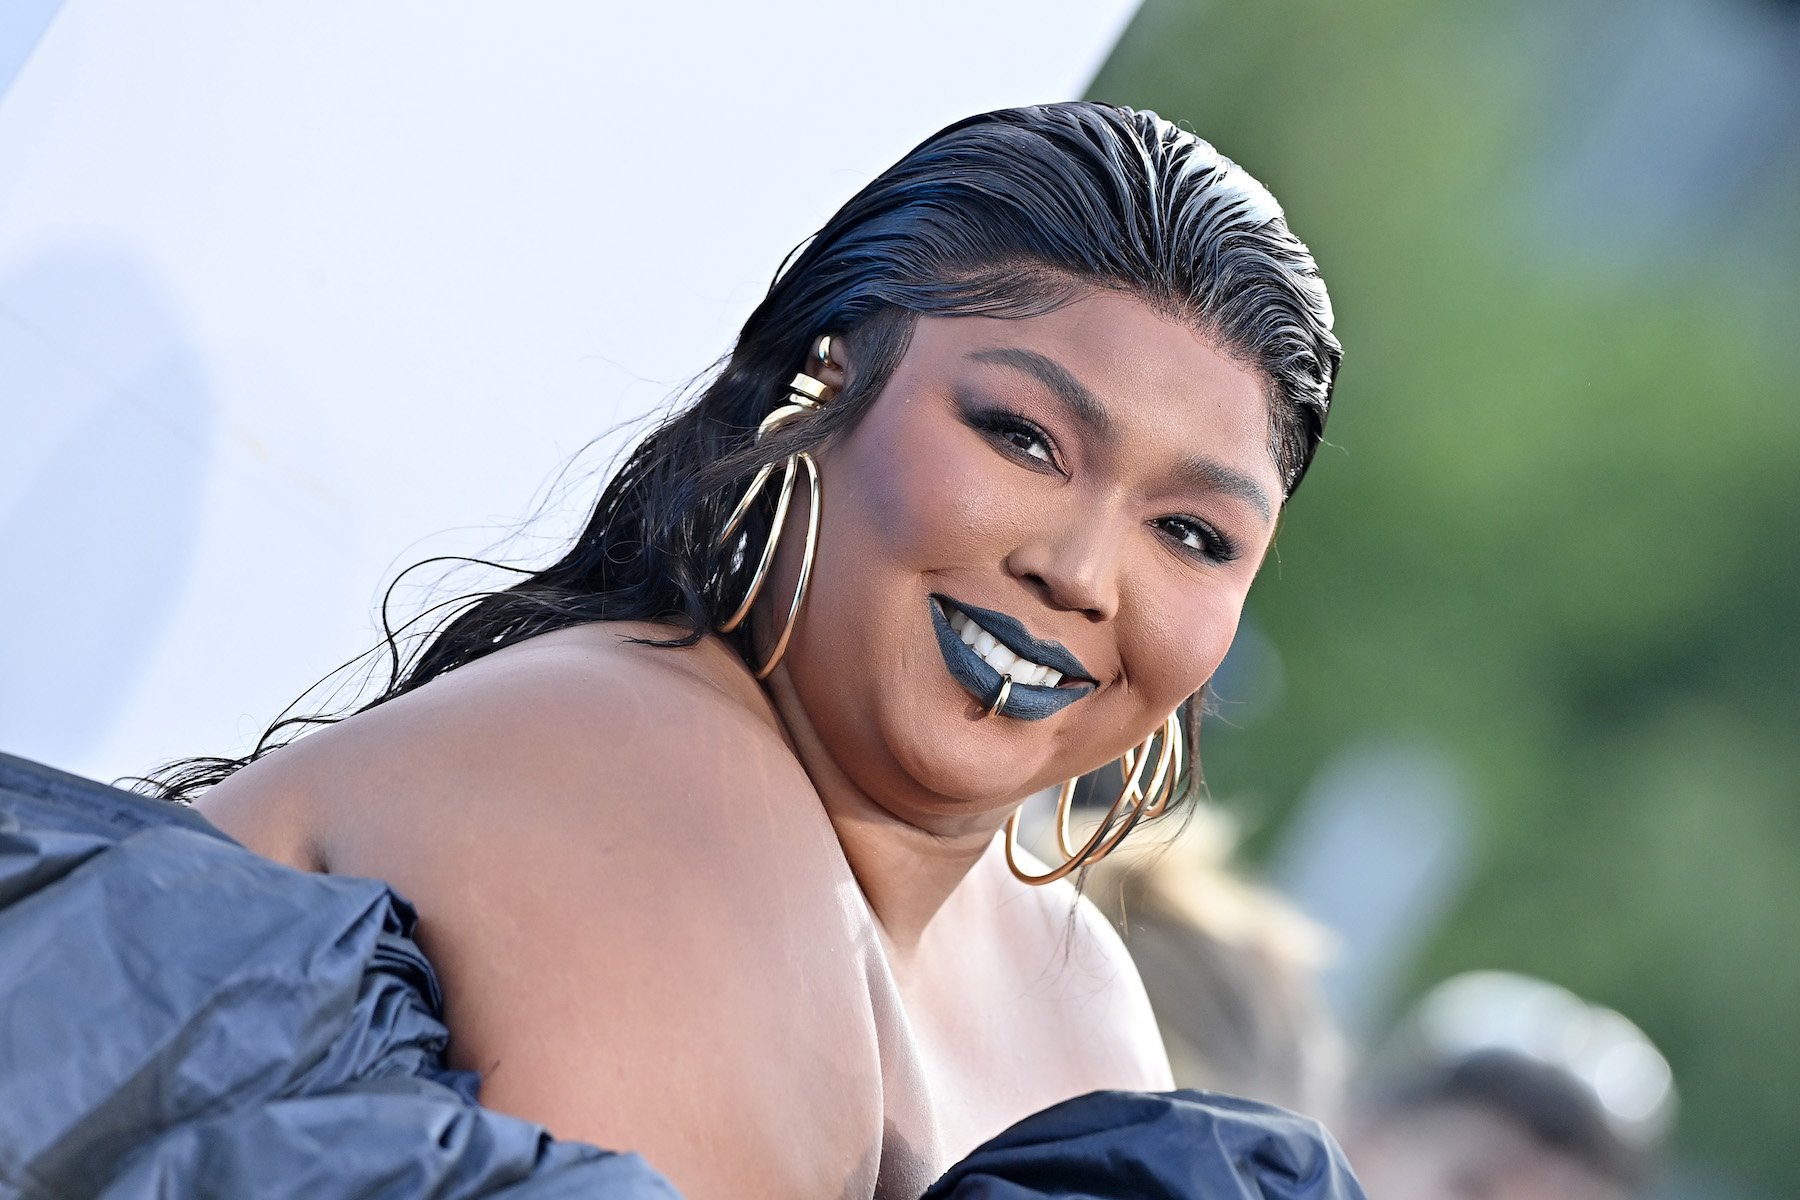 Lizzo, who played James Madison's crystal flute, wearing blue with slicked back hair.